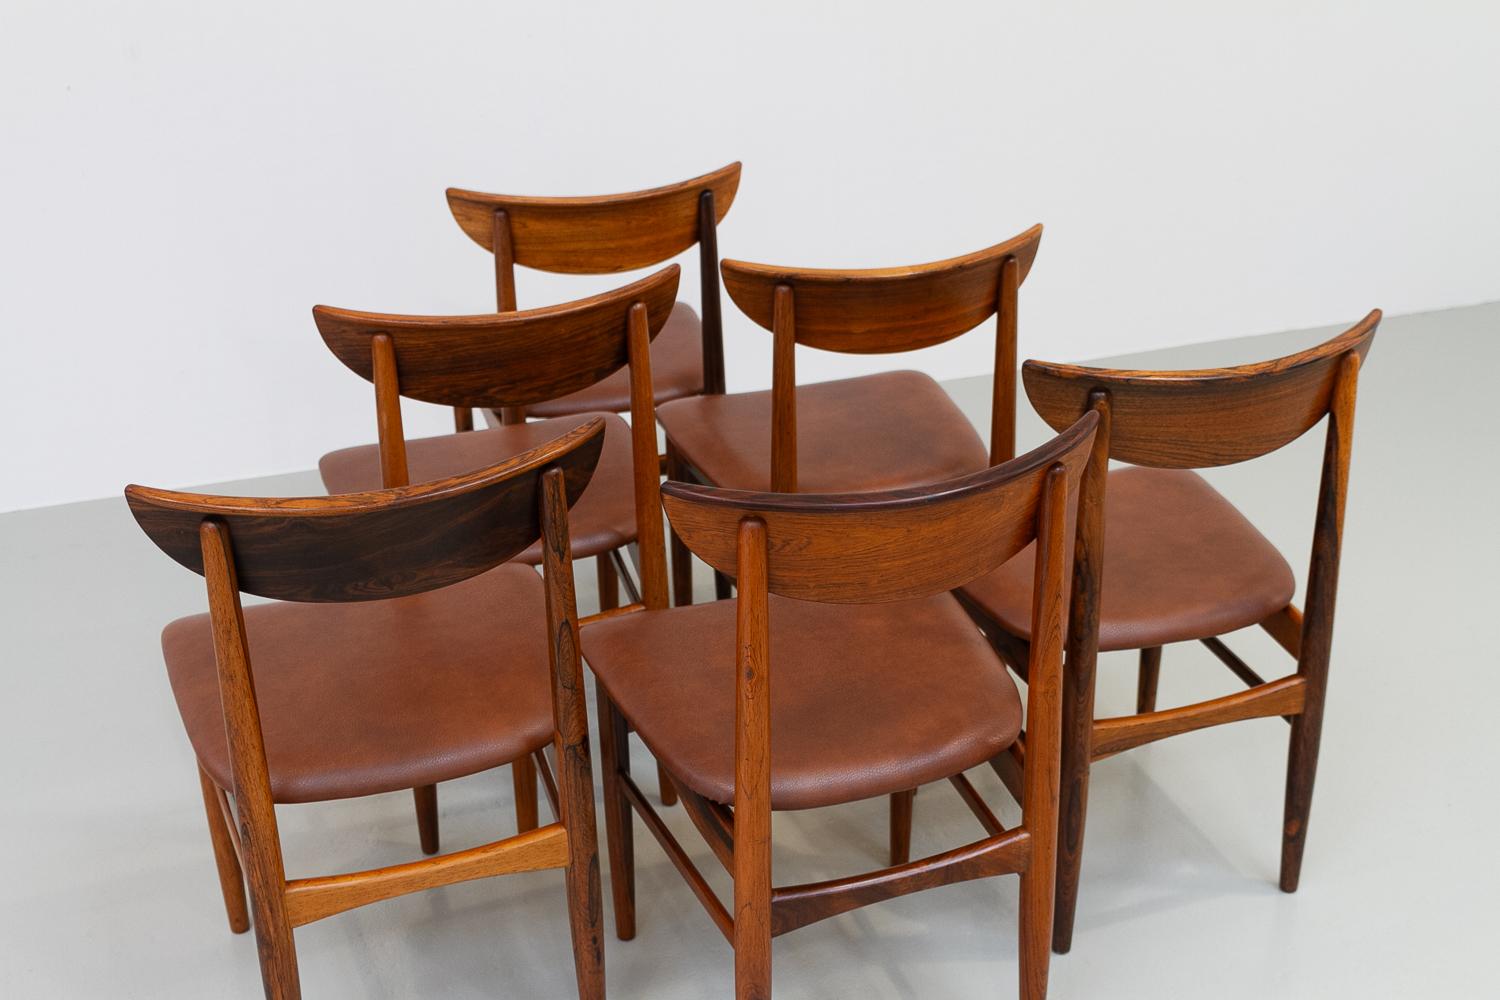 Vintage Danish Rosewood Dining Chairs by E.W. Bach for Skovby, 1960s. Set of 6. For Sale 5